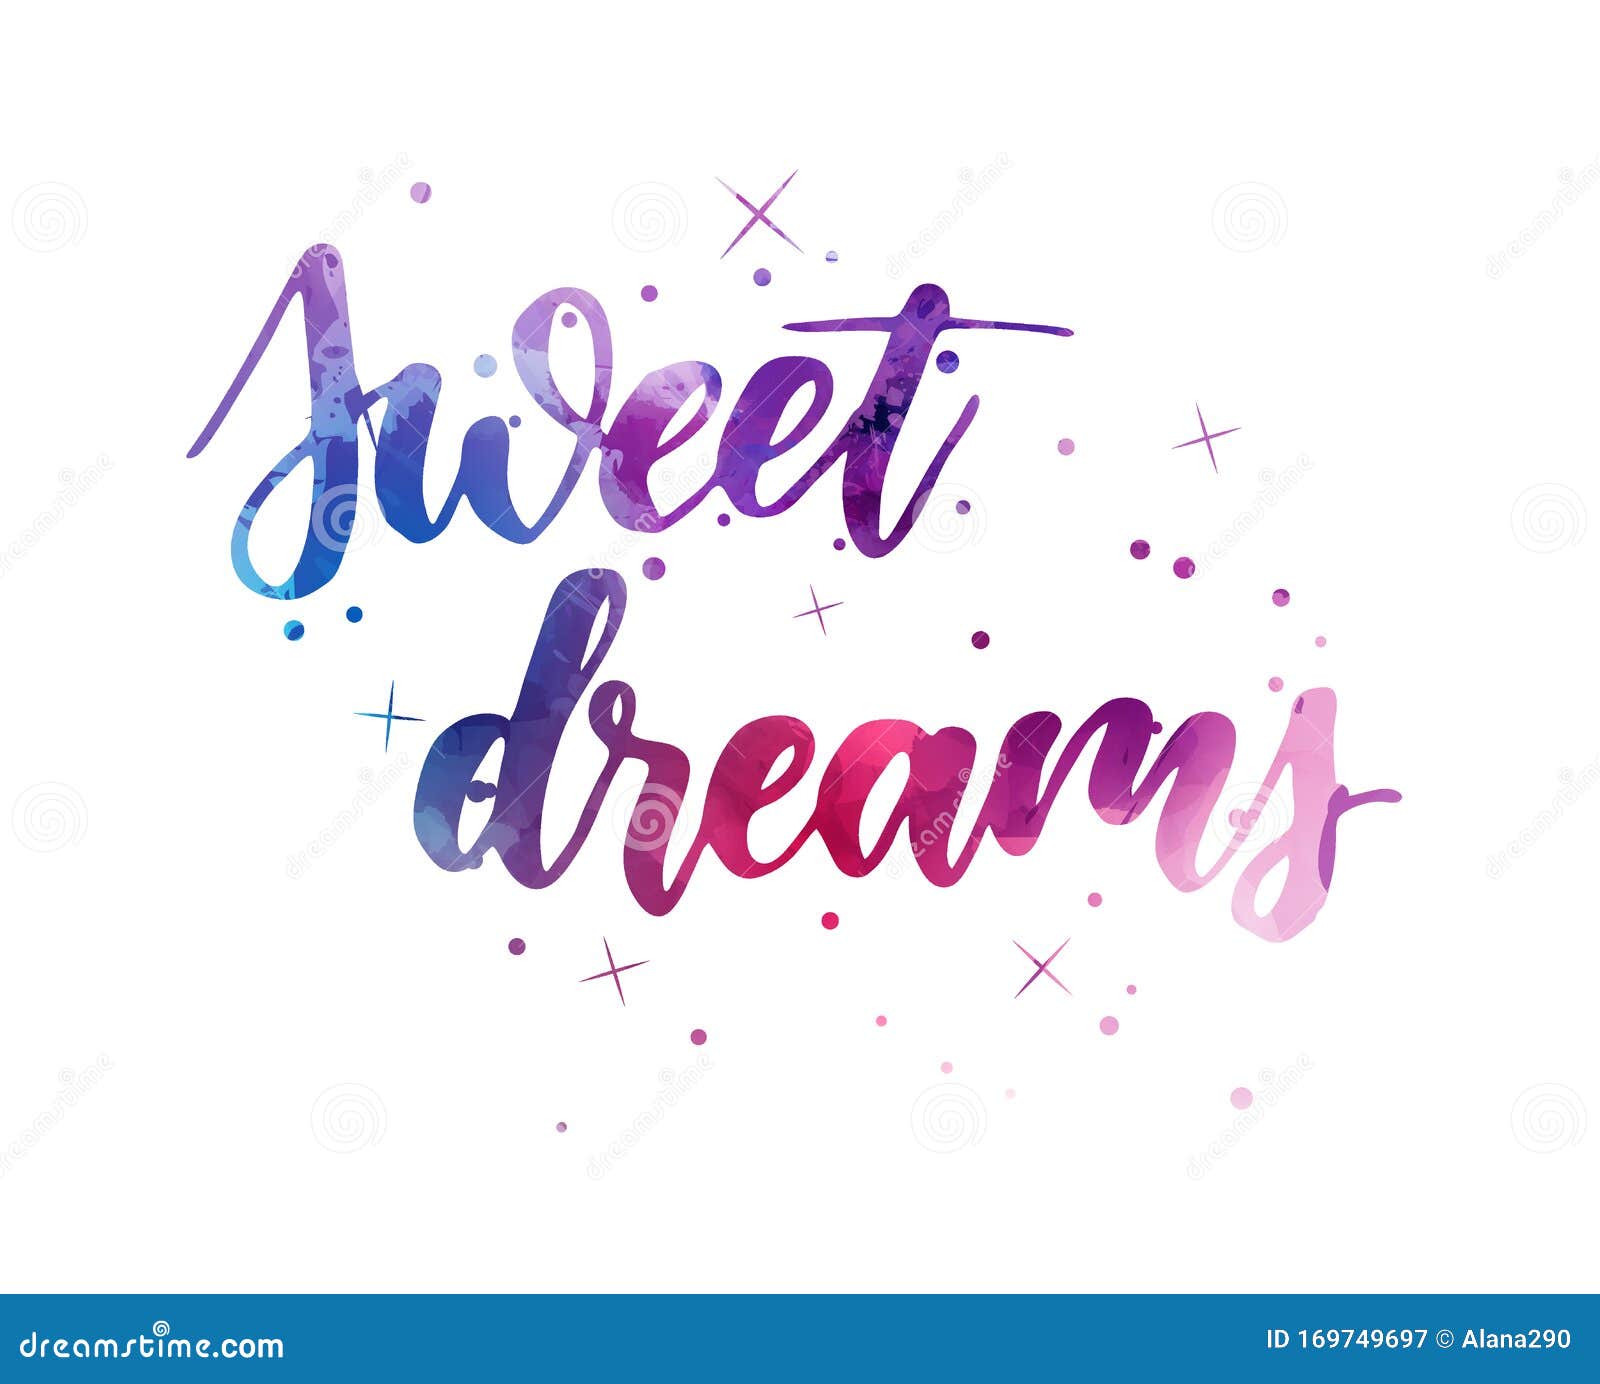 Sweet Dreams Lettering Calligraphy Stock Vector - Illustration of ...